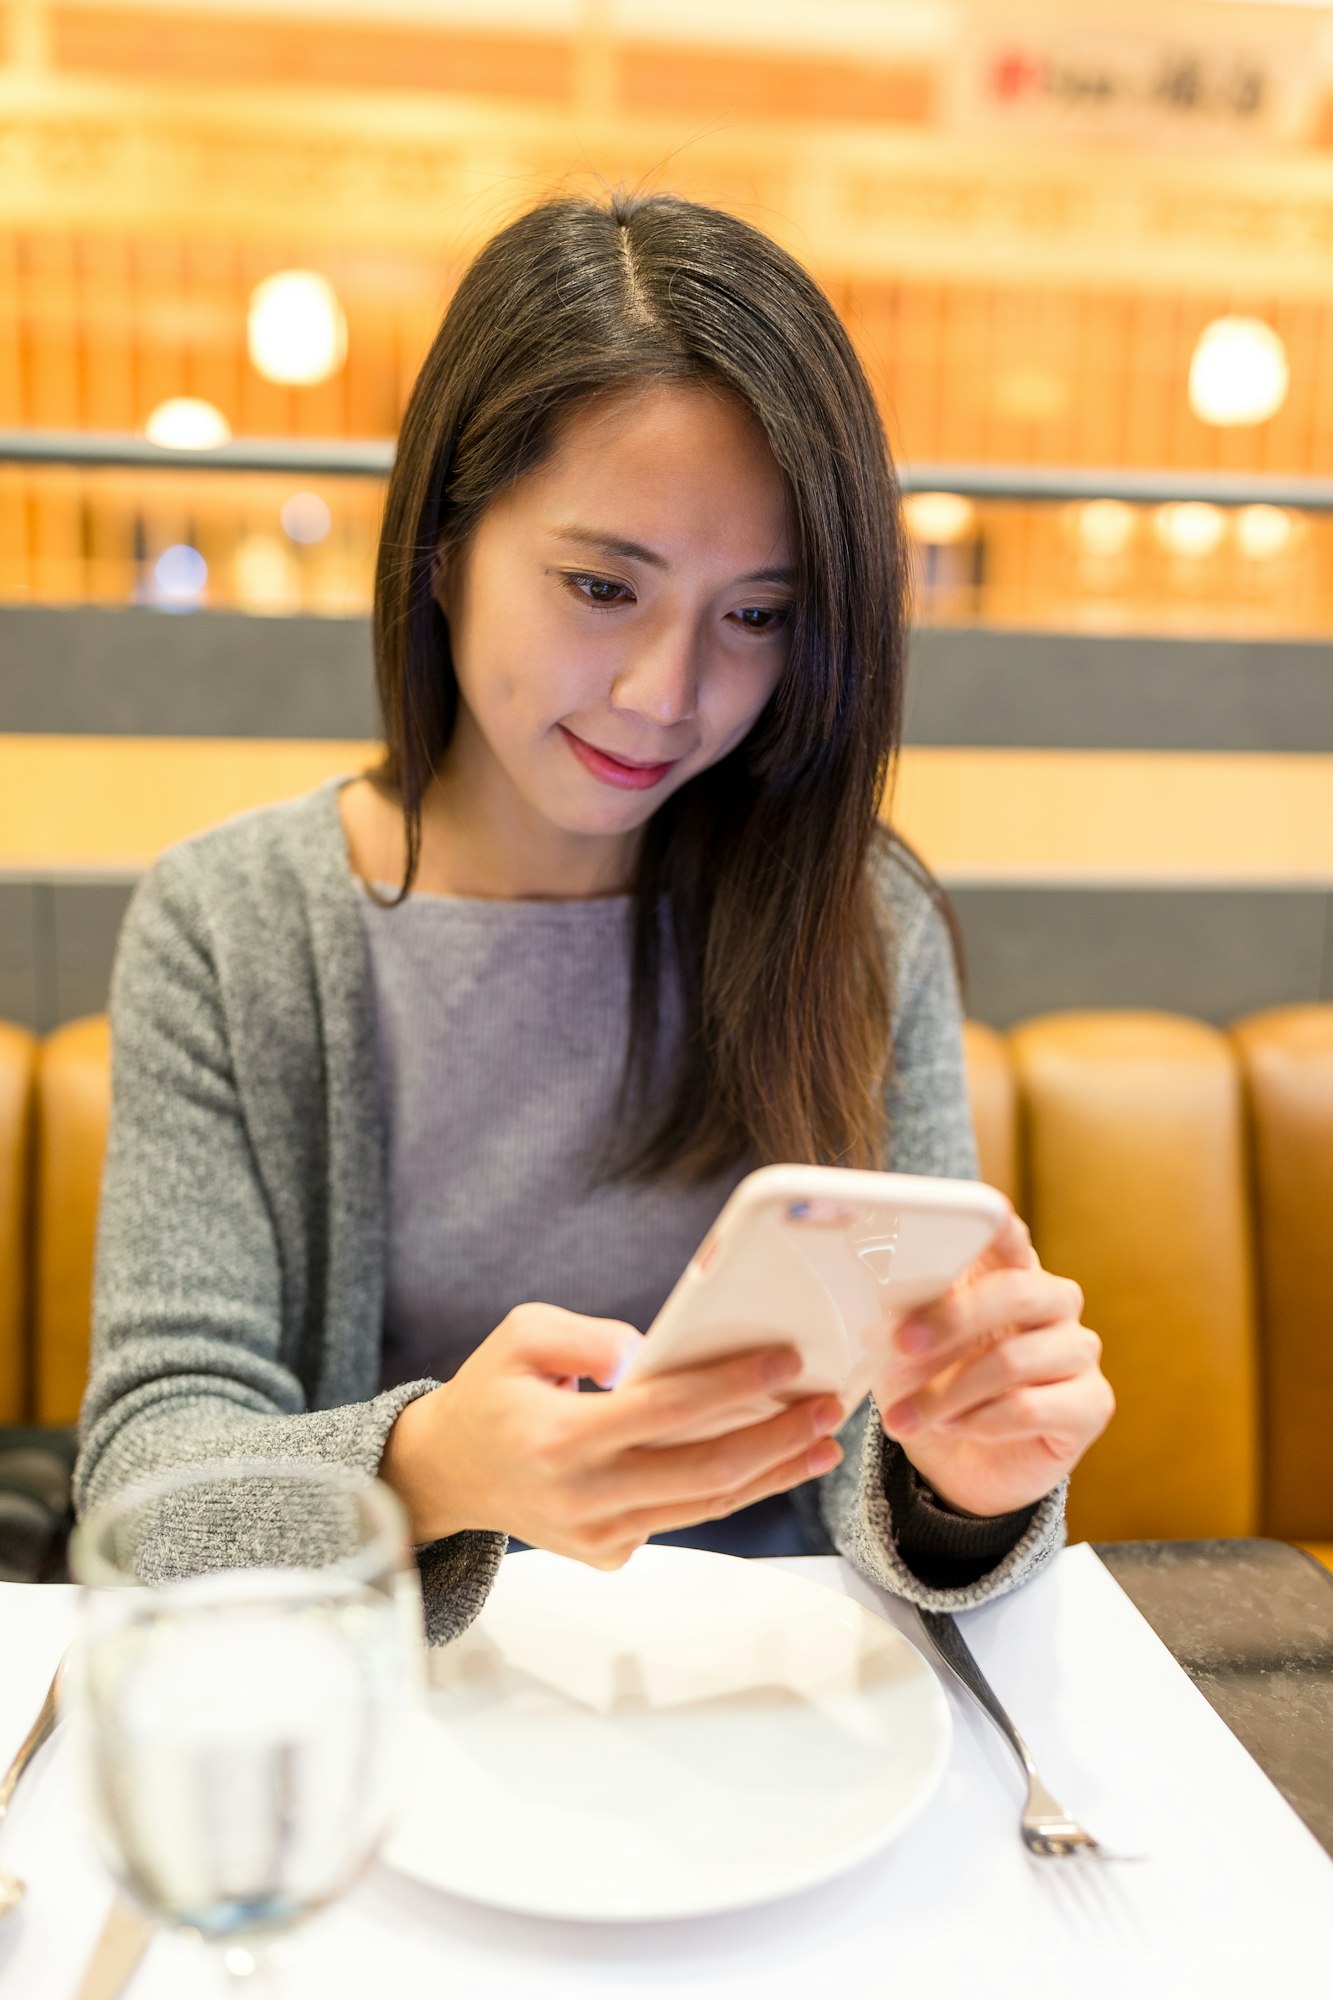 Young Woman use of mobile phone in restaurant